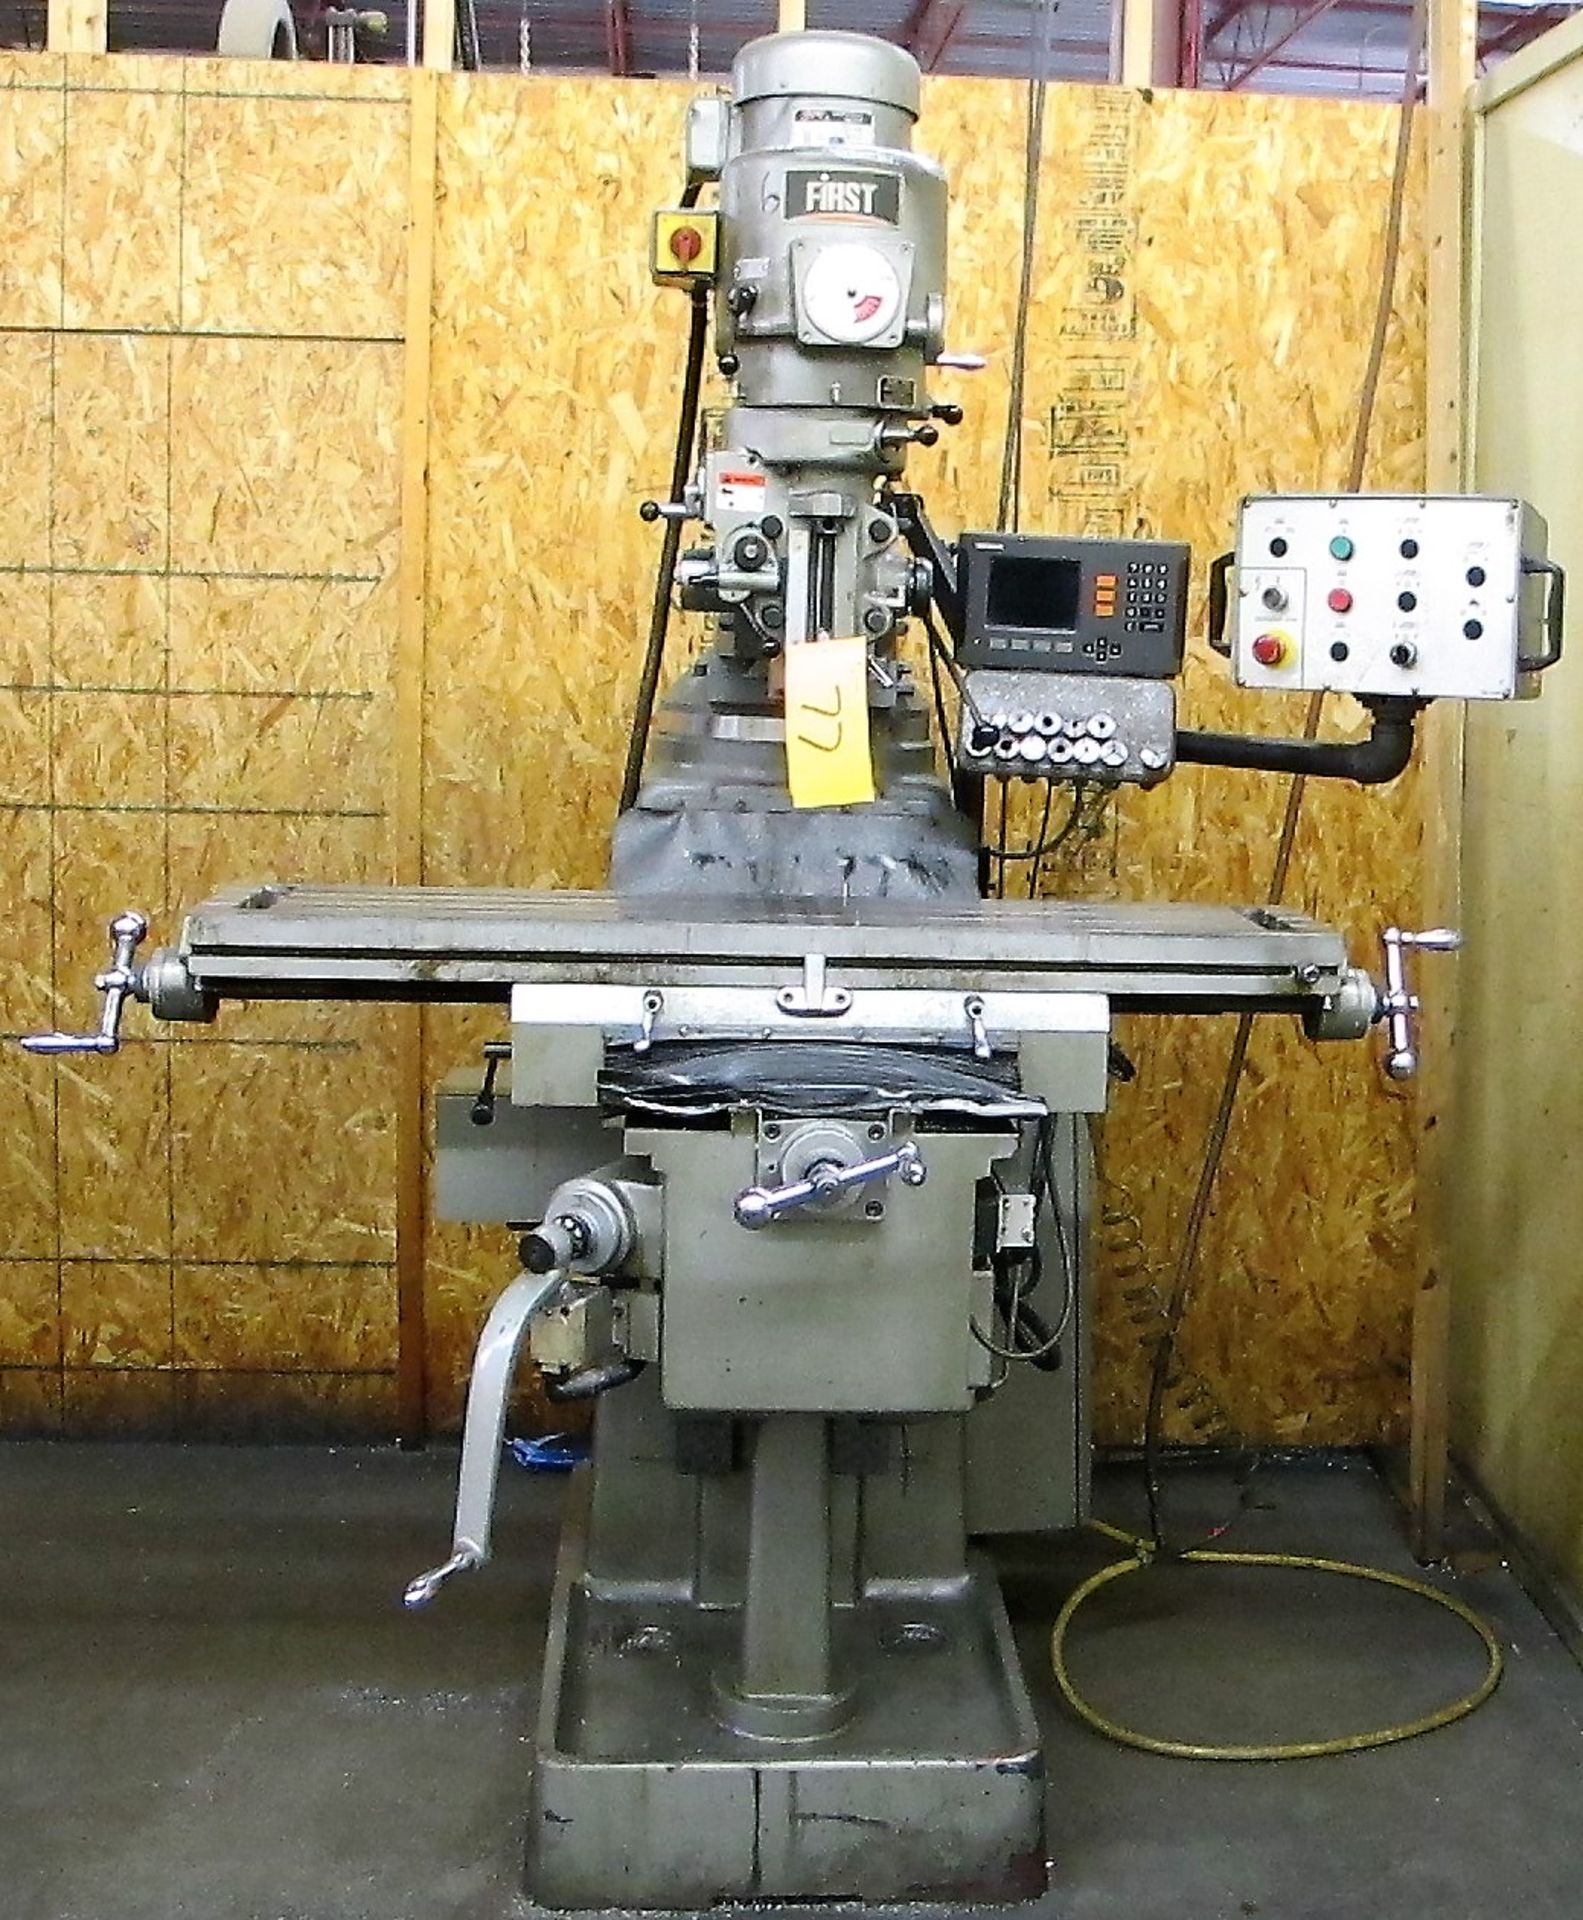 FIRST LC-185VS VERTICAL MILLING MACHINE, 3HP, 50" X 10" TABLE, POWER TABLE, 60 - 4500 RPM,